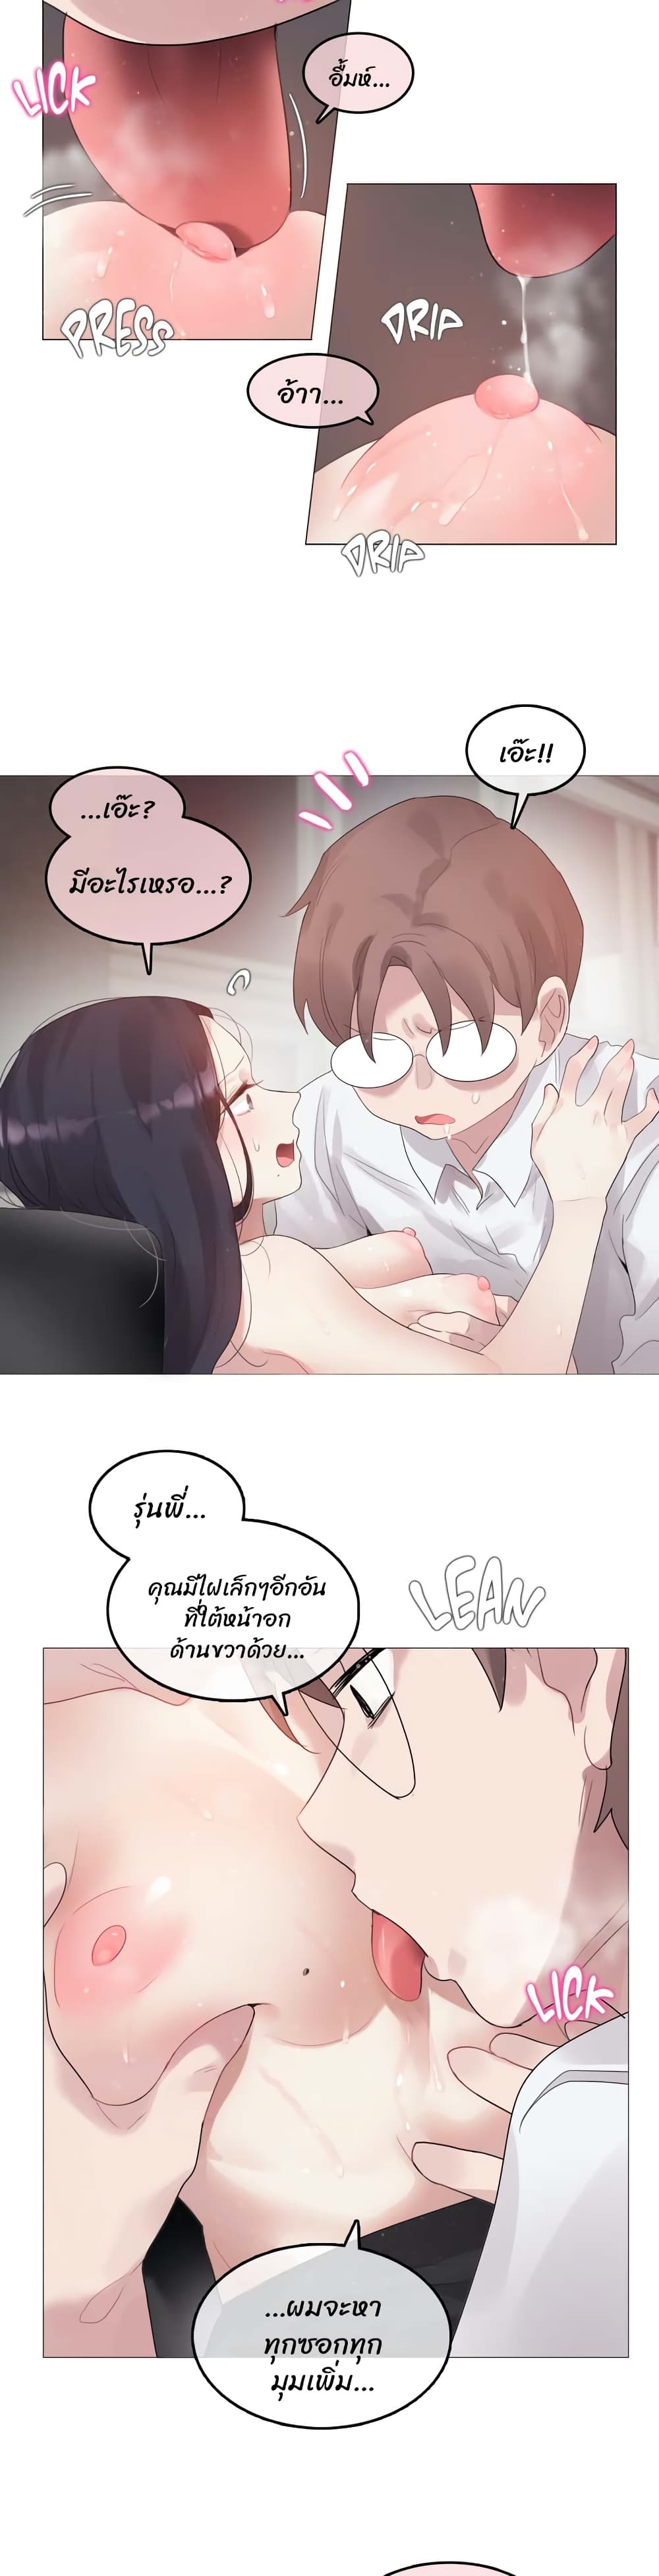 A Pervert's Daily Life 102-102